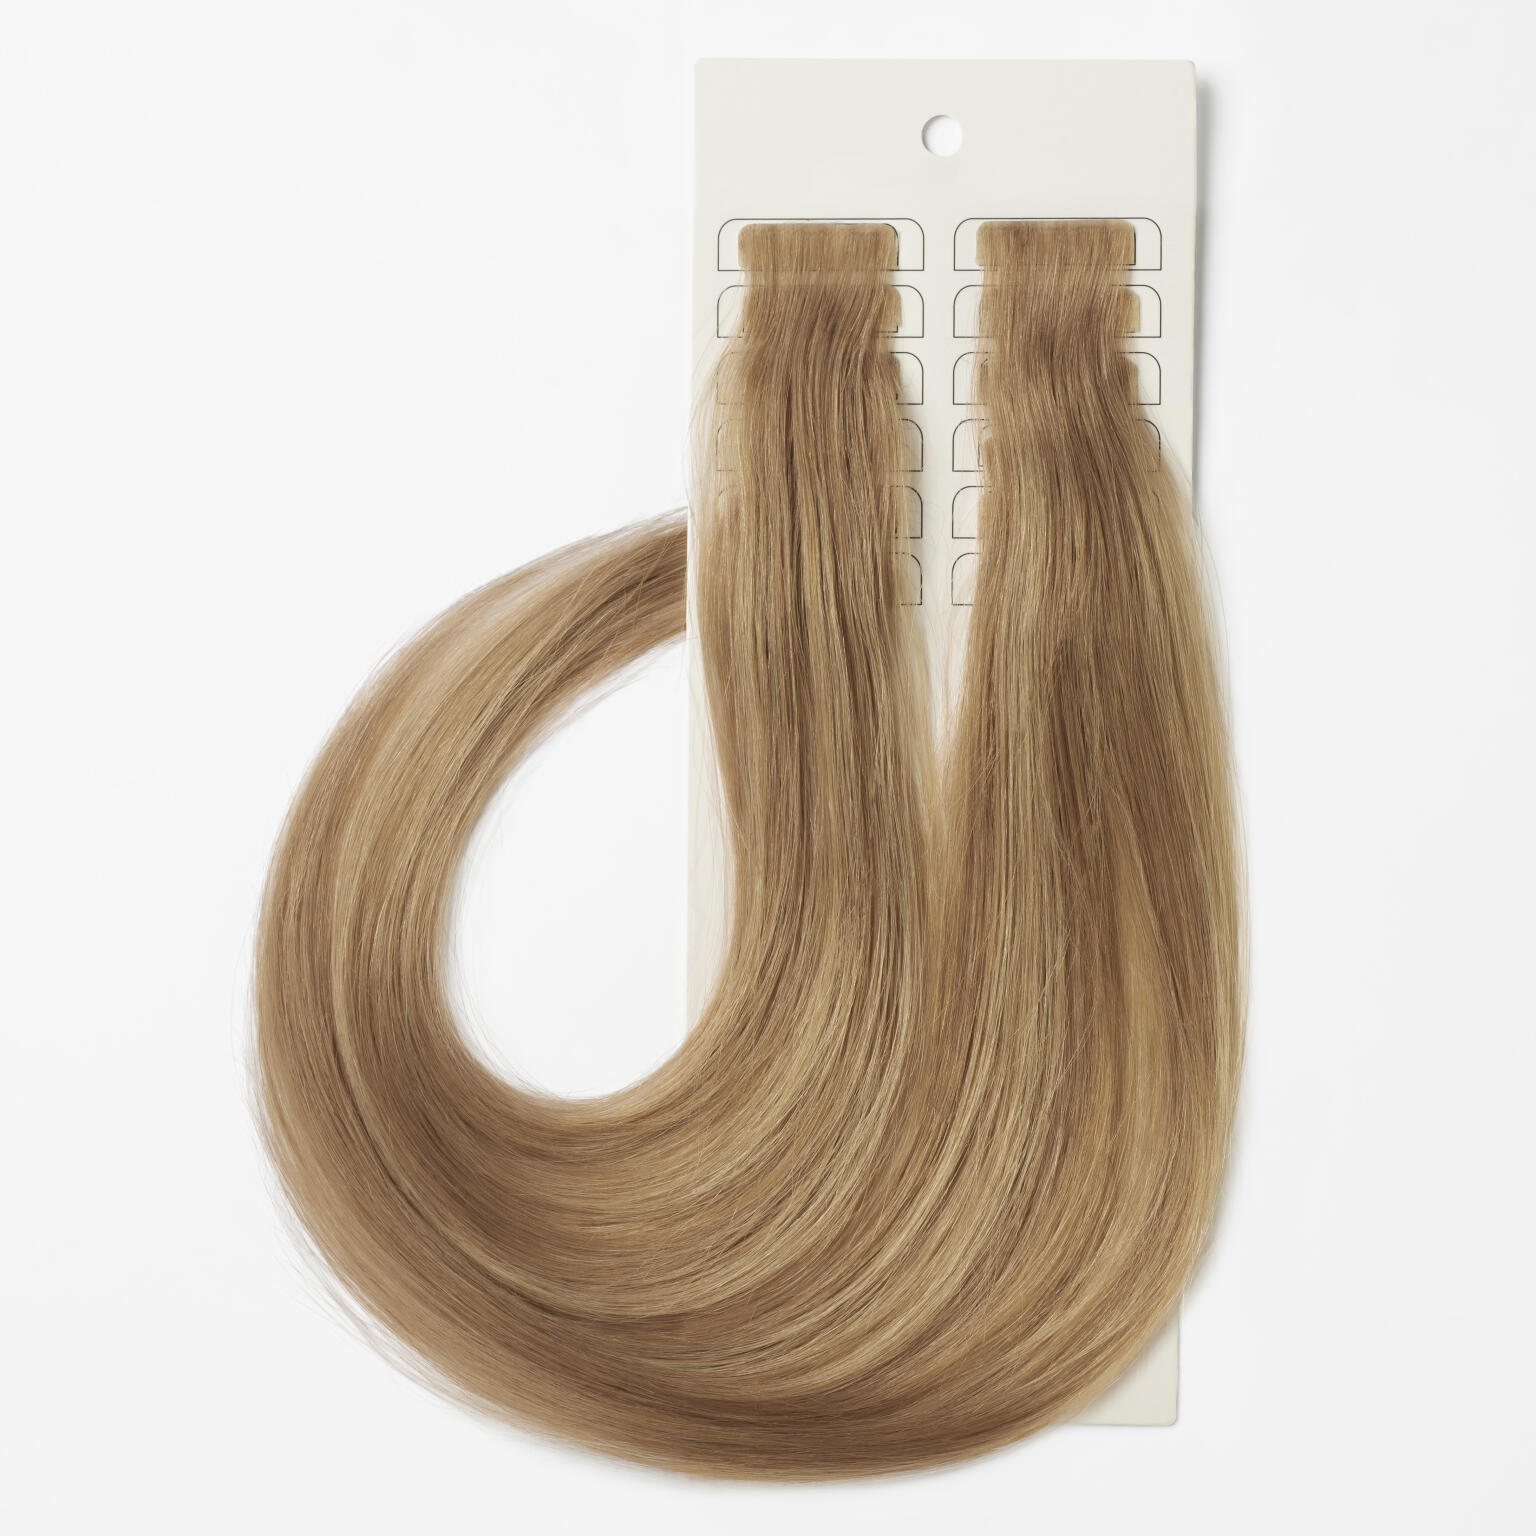 Luxe Tape Extensions Seamless 3 CM9.89/10.89 50 cm